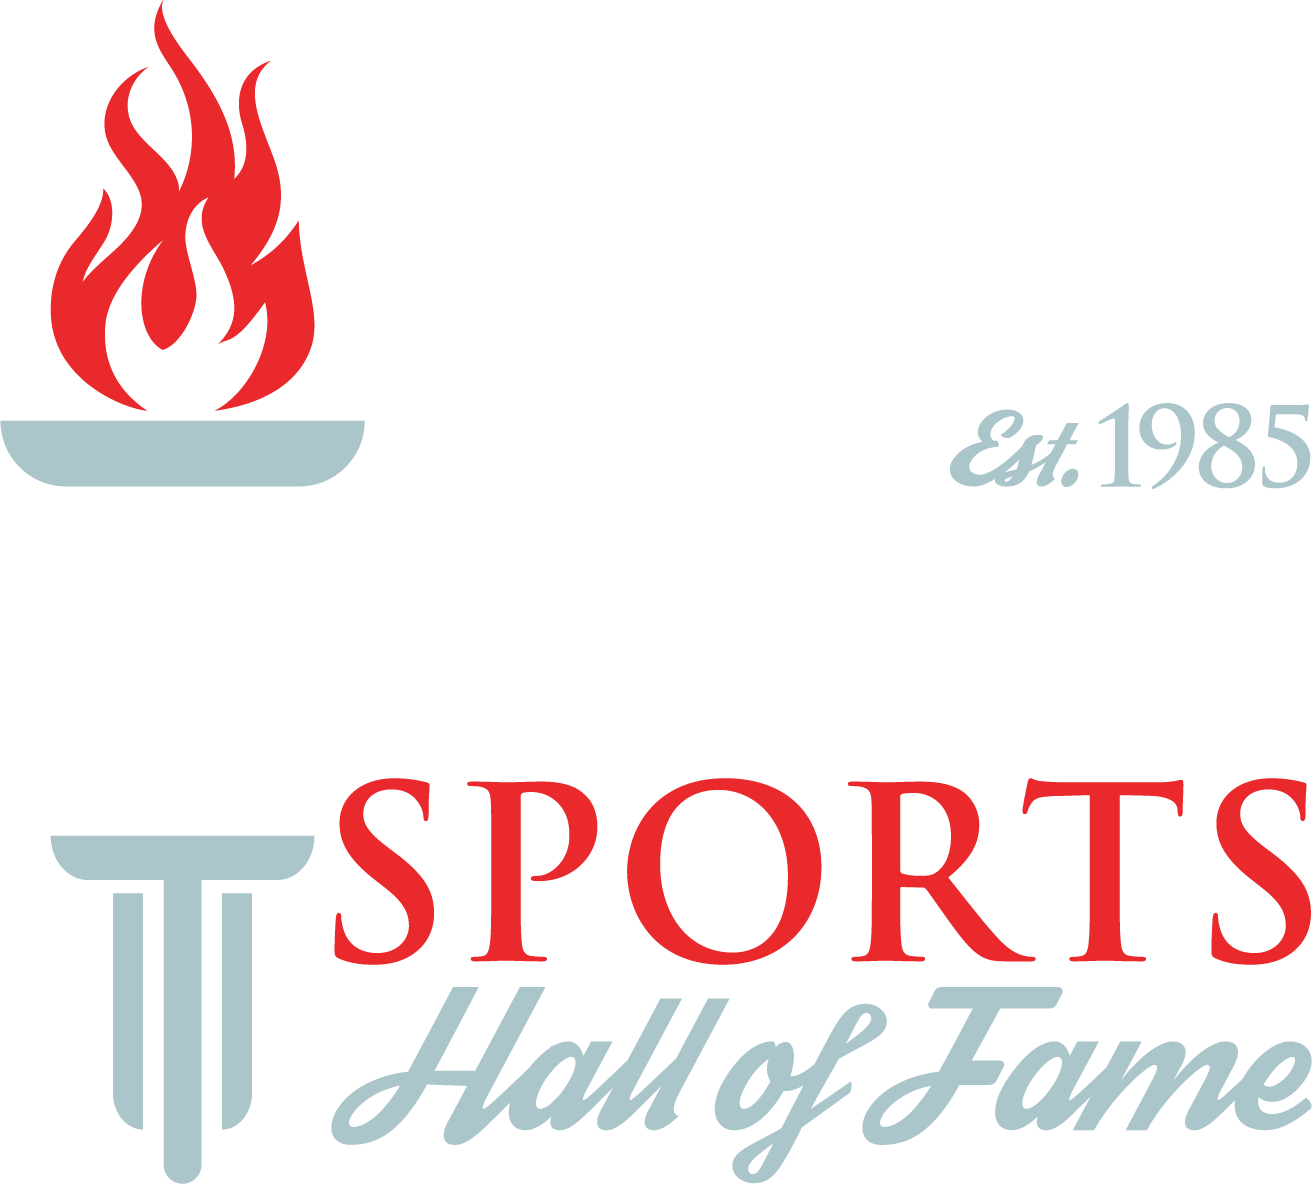 Barrie Sports Hall of Fame logo